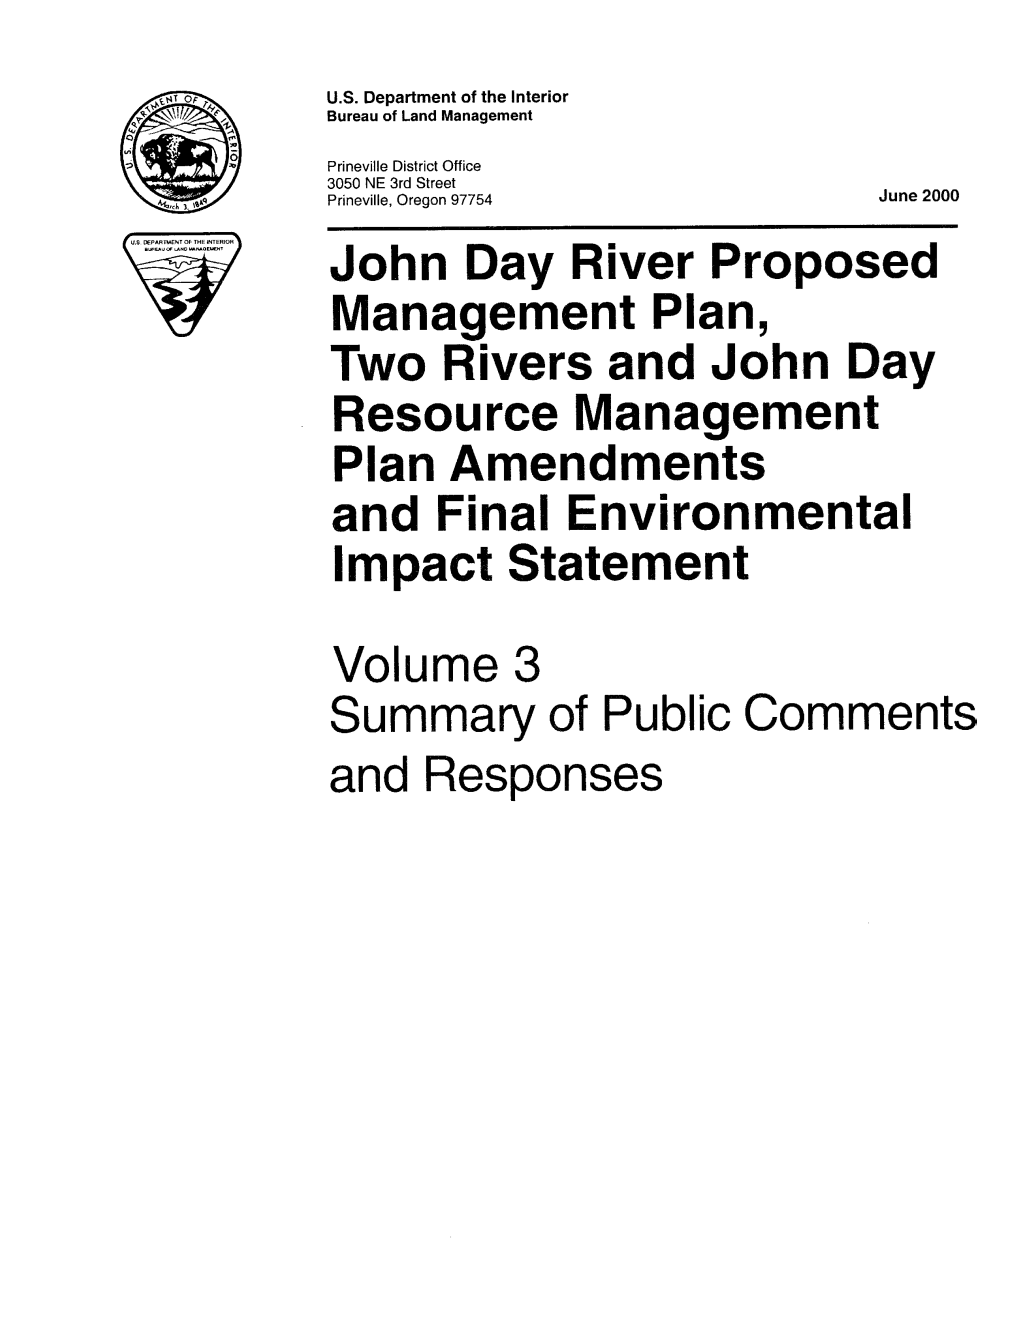 John Day River Proposed Management Plan, Two Rivers and John Day Resource Management Plan Amendments and Final Environmental Impact Statement